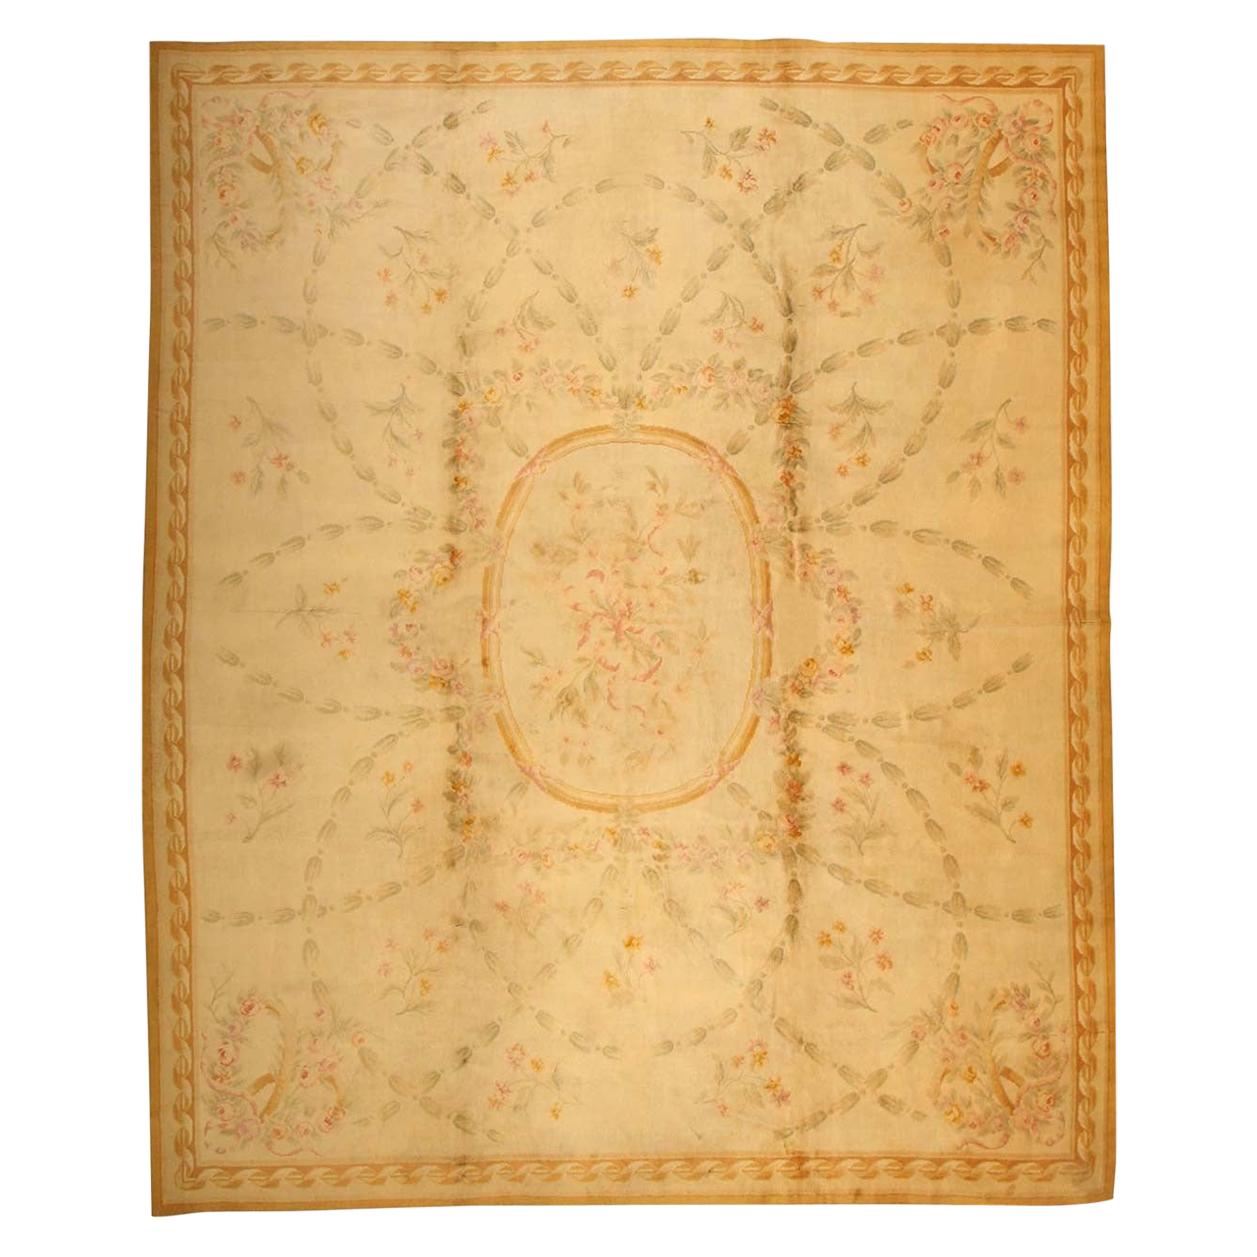 Large Floral Antique Savonnerie French Rug. Size: 14 ft x 17 ft